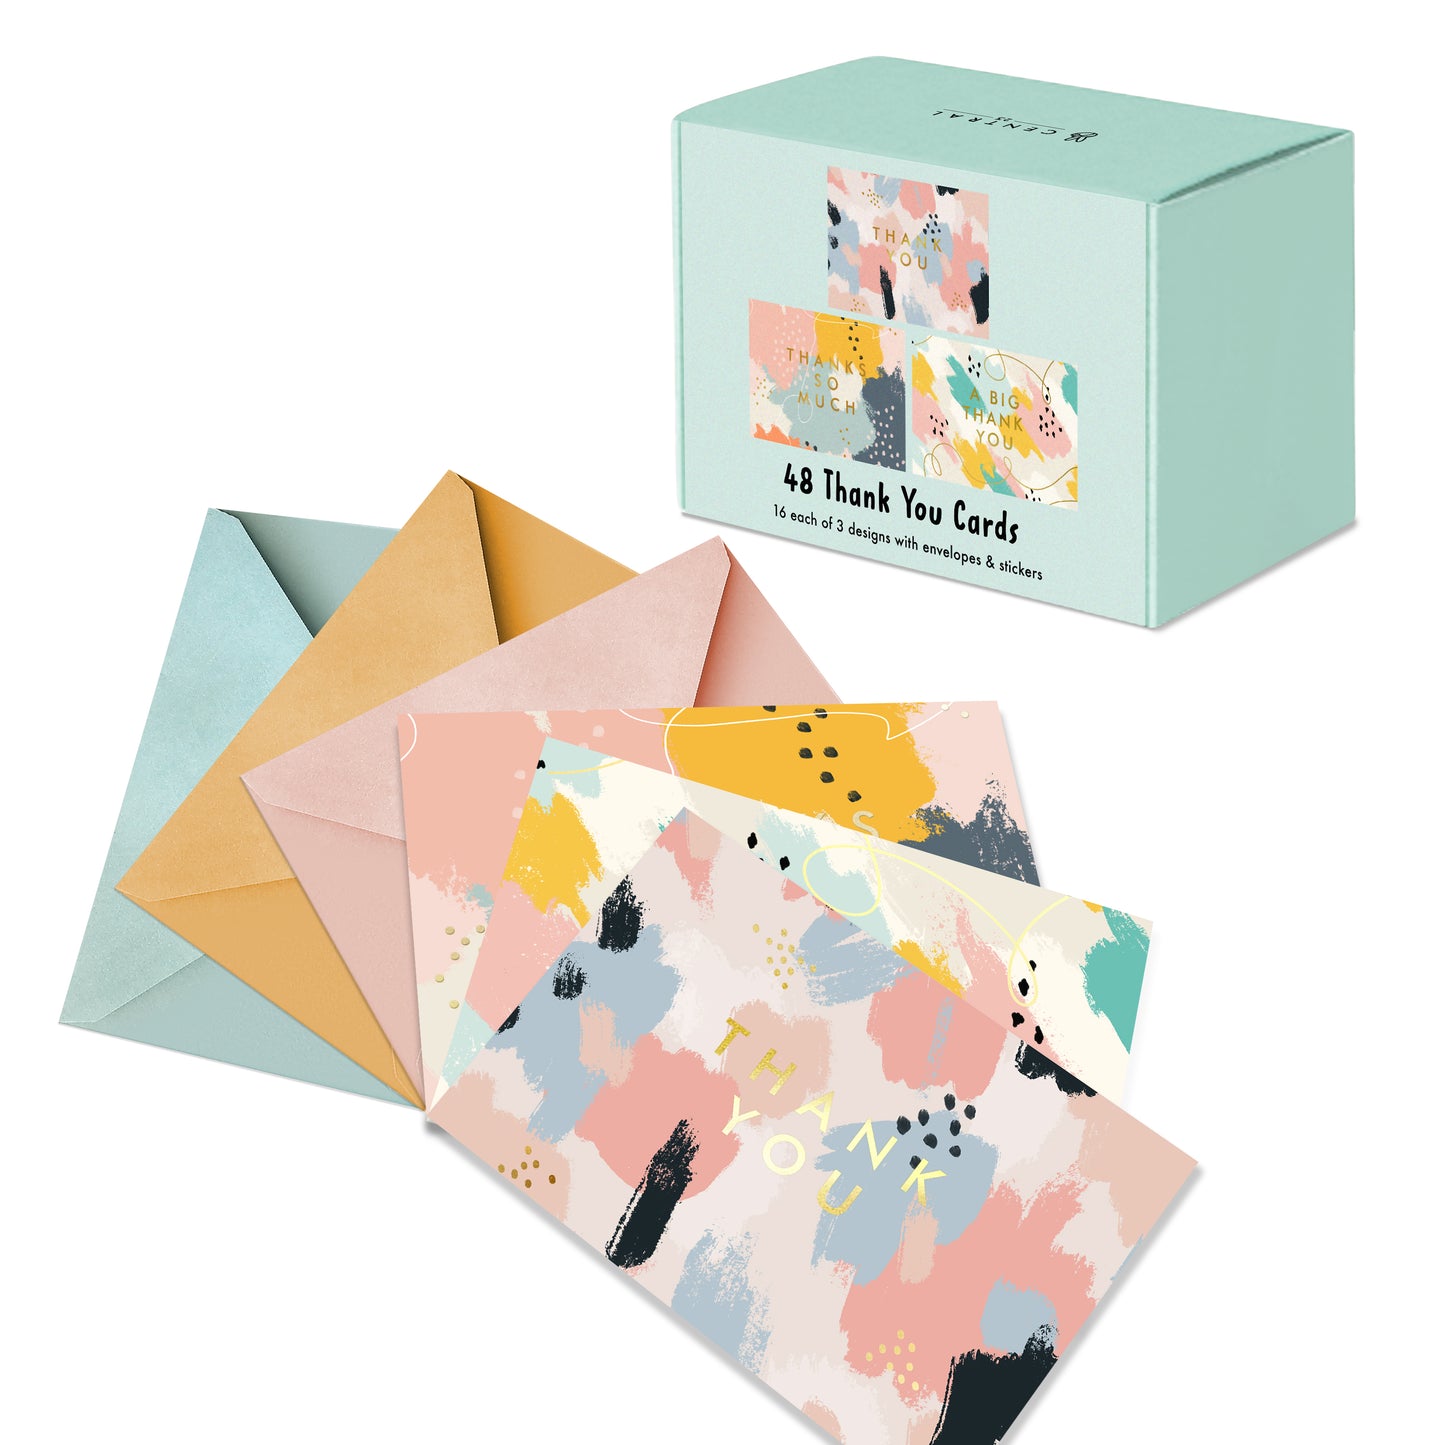 Abstract Foiled Thank You Greeting Cards Multipack - Set of 48 cards - 3 Assorted Designs